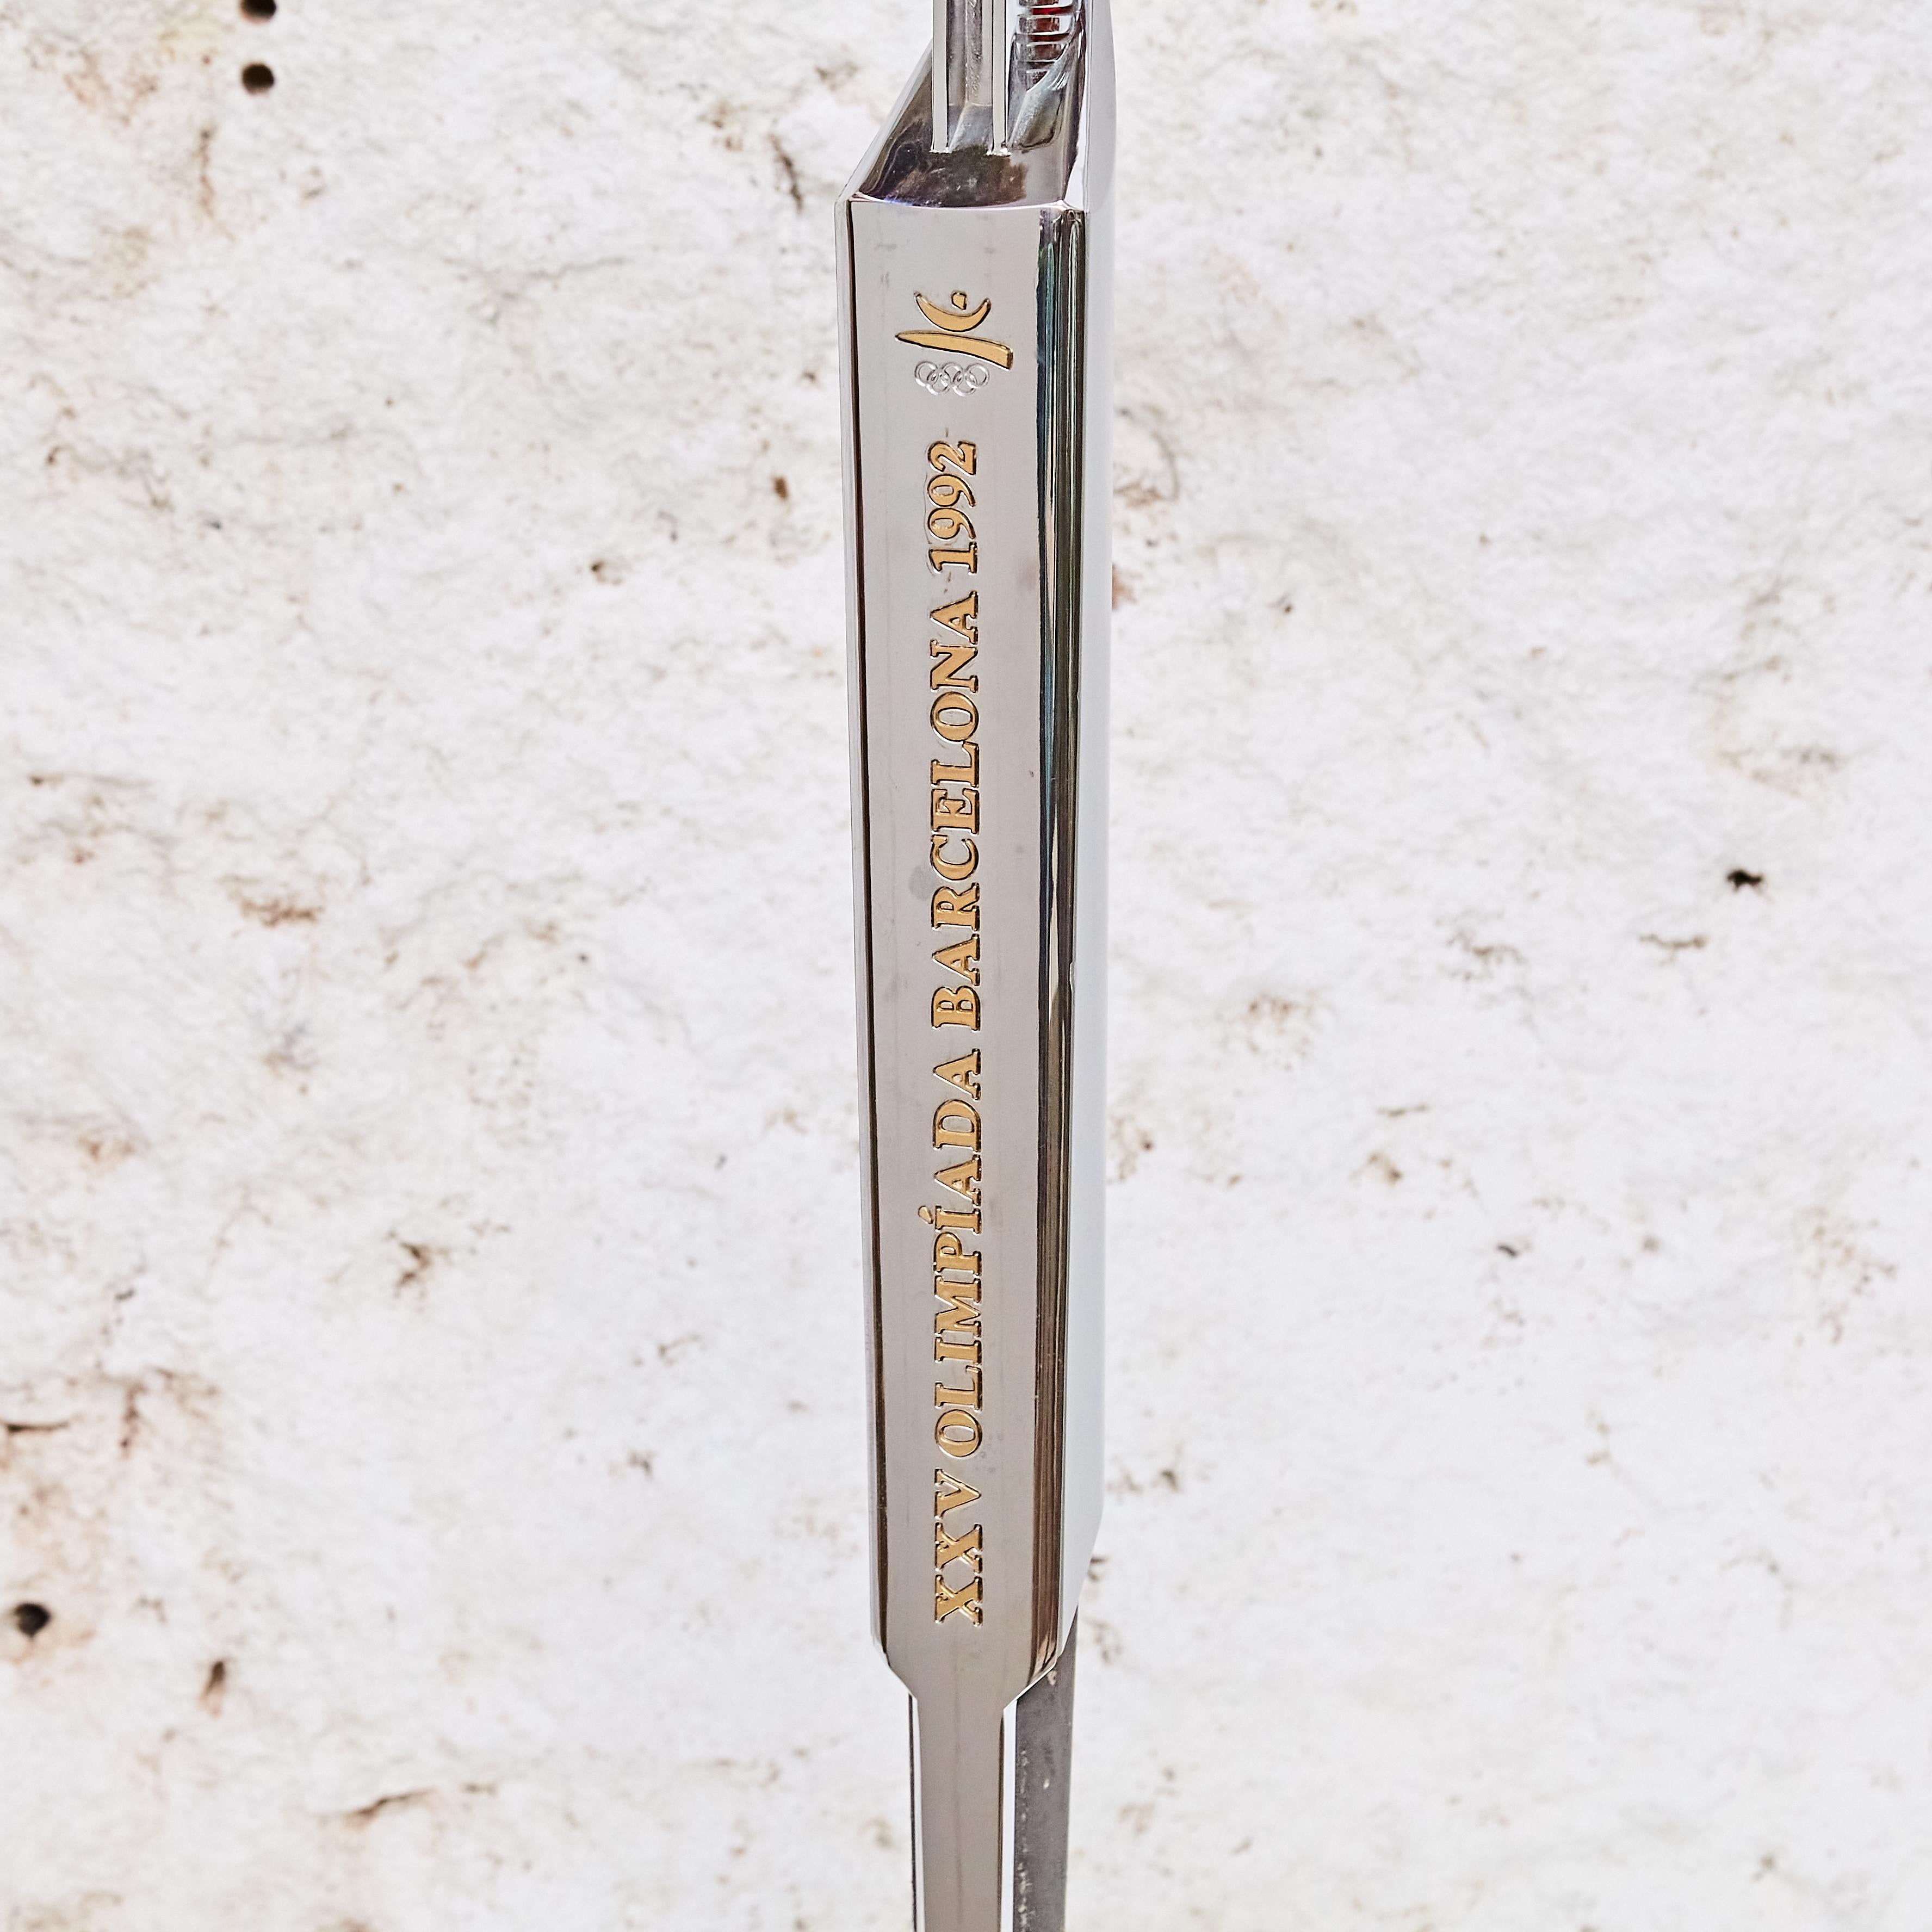 Olympic torch prototype (PT) in chromed plastic for Barcelona '92 by André Ricard.

Manufactured in Spain, circa 1990.

In good original condition, with consistent with age and use, preserving a beautiful patina with some